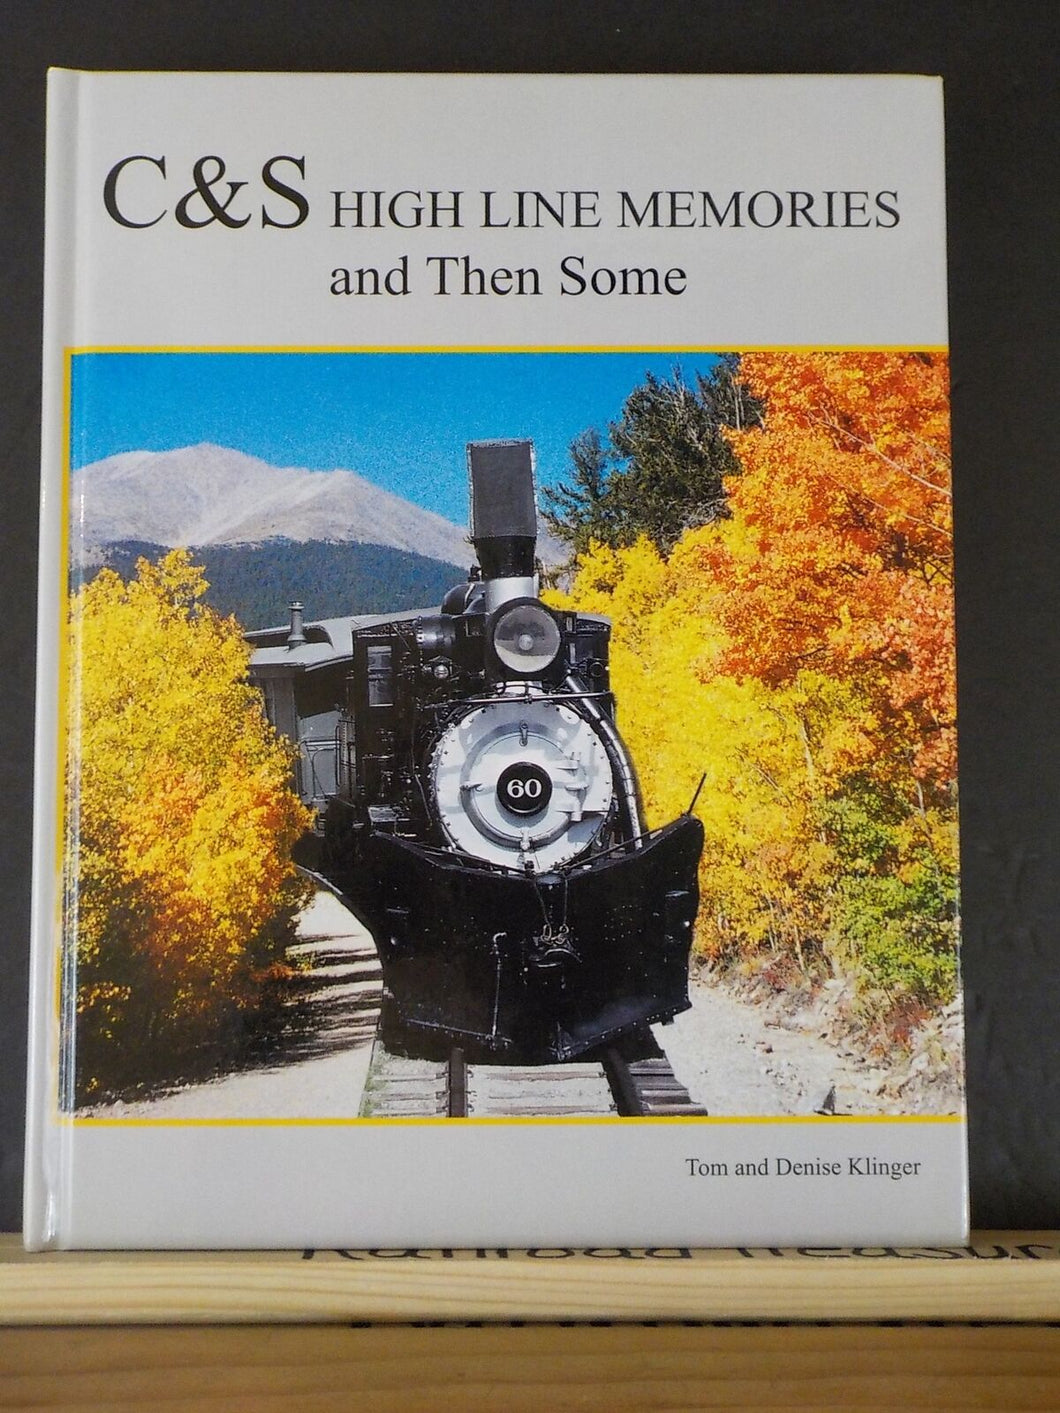 C&S High Line Memories and Then Some by Tom & Denise Klinger hard cover